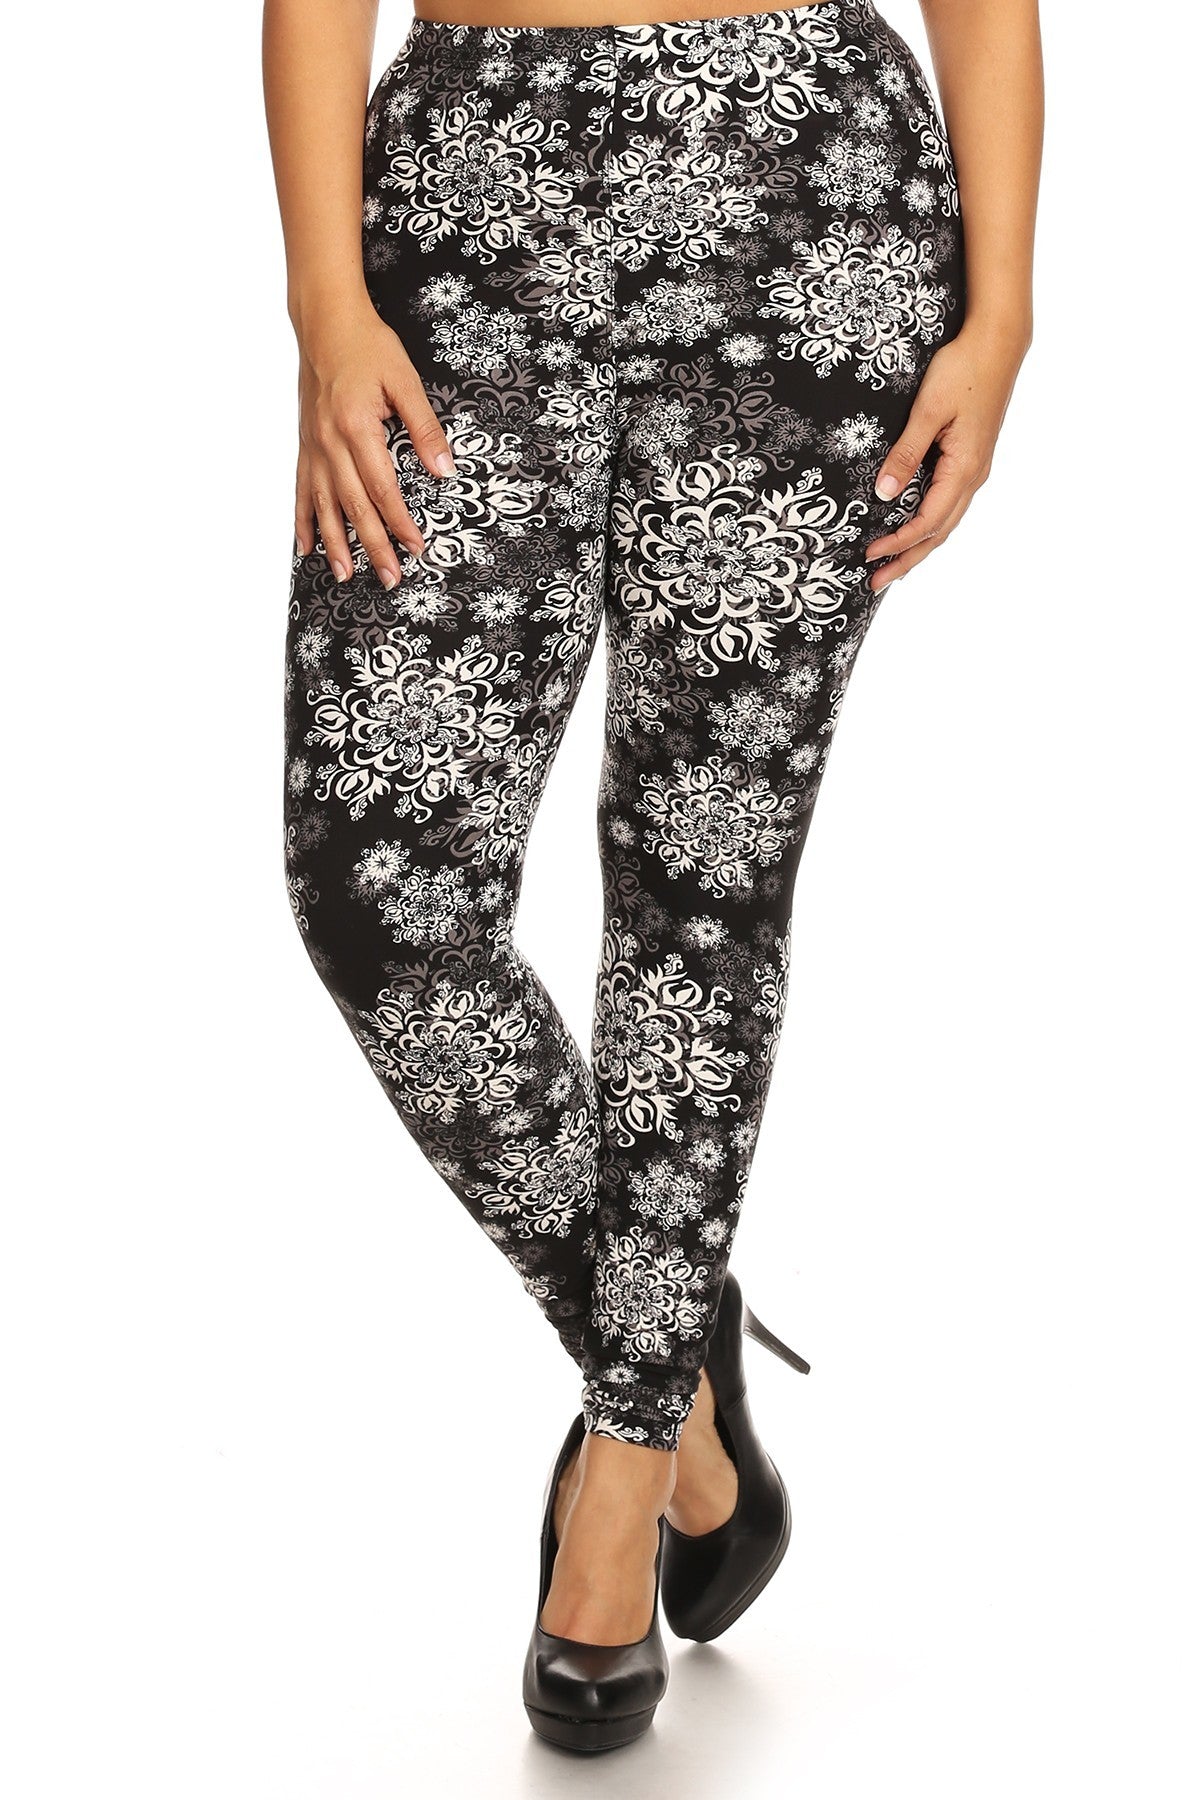 - Voluptuous (+) Plus Size Abstract Print, Full Length Leggings - Ships from The USA - womens leggings at TFC&H Co.